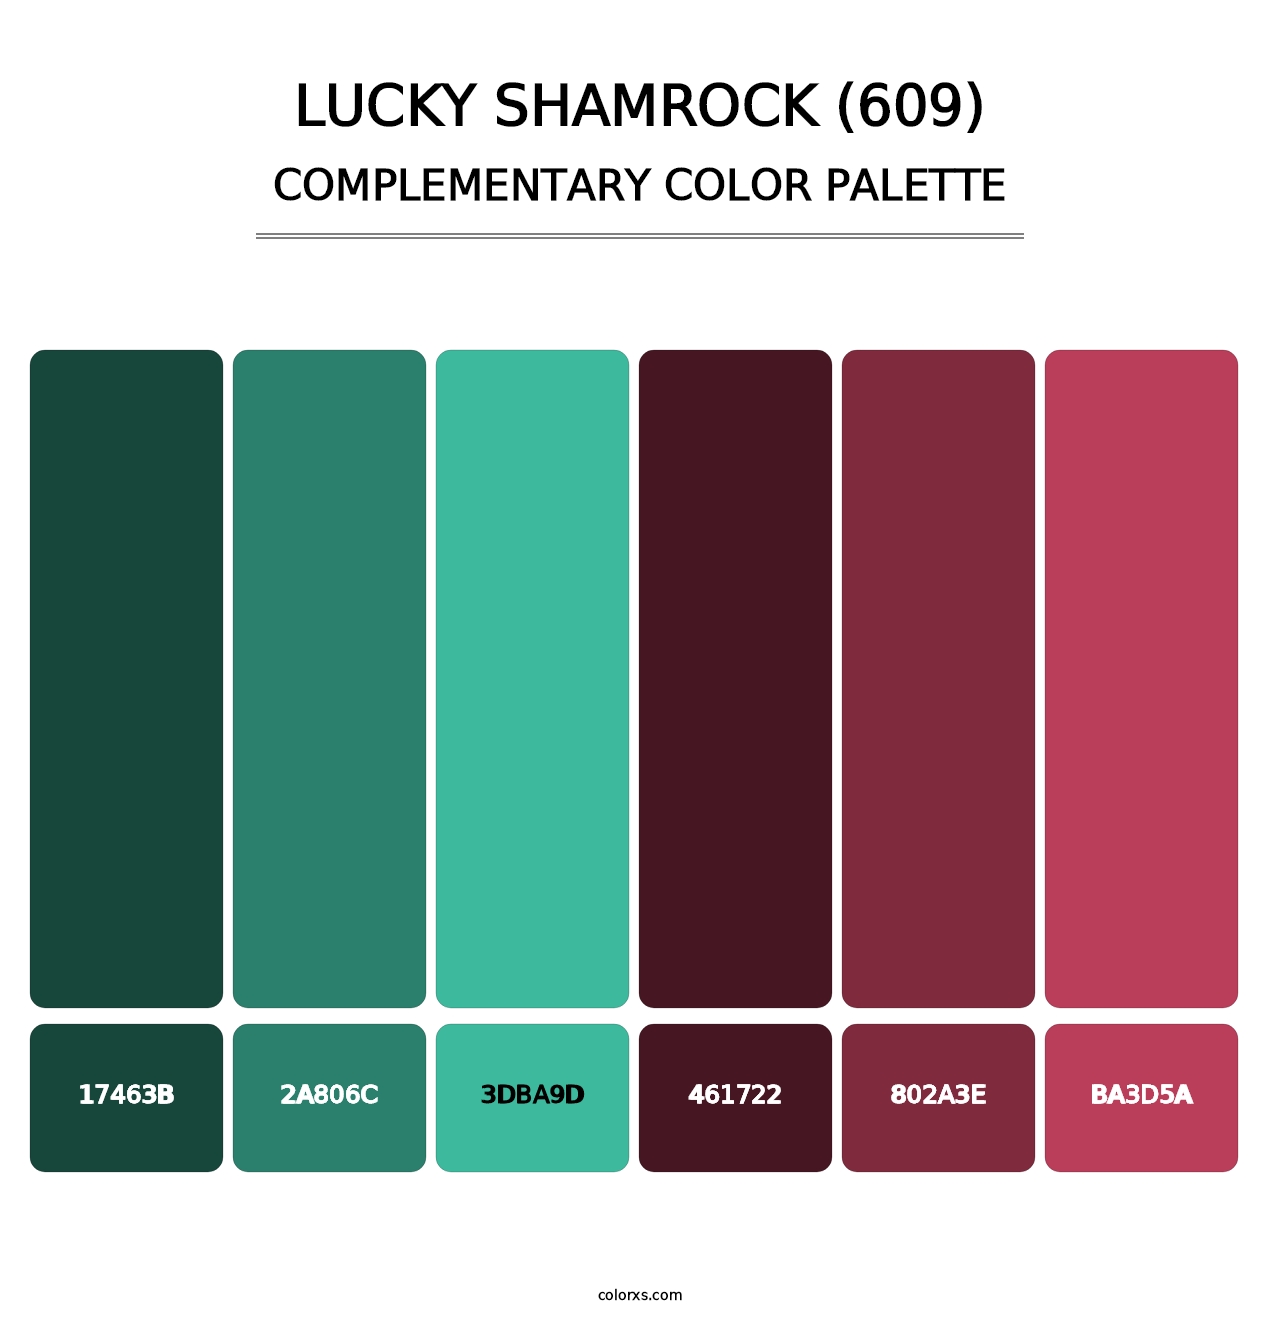 Lucky Shamrock (609) - Complementary Color Palette